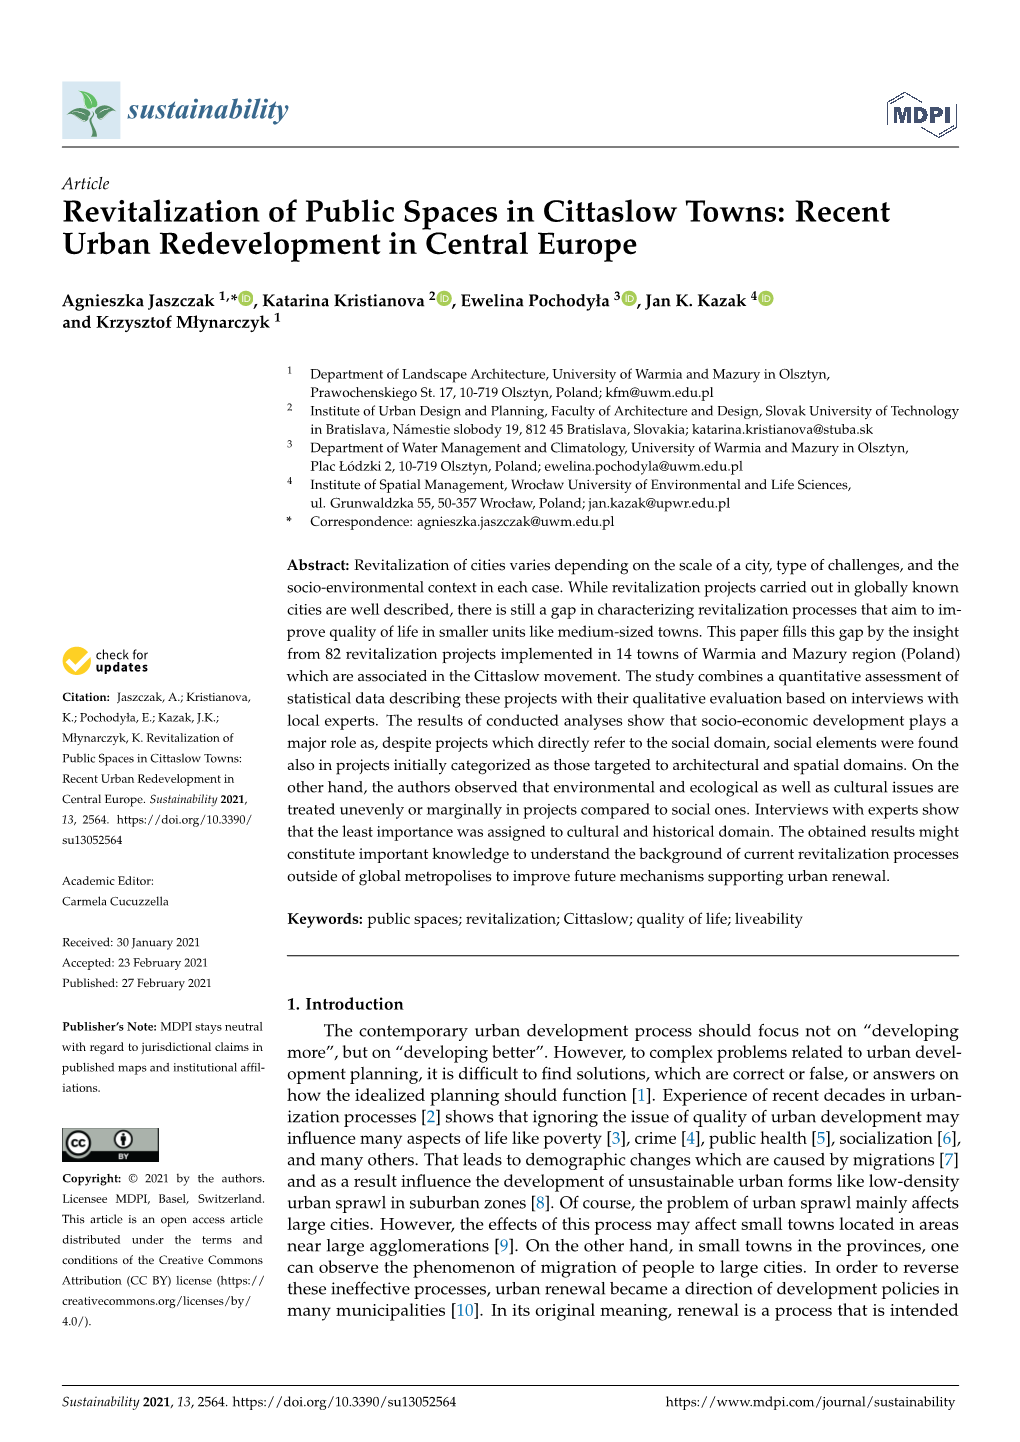 Revitalization of Public Spaces in Cittaslow Towns: Recent Urban Redevelopment in Central Europe